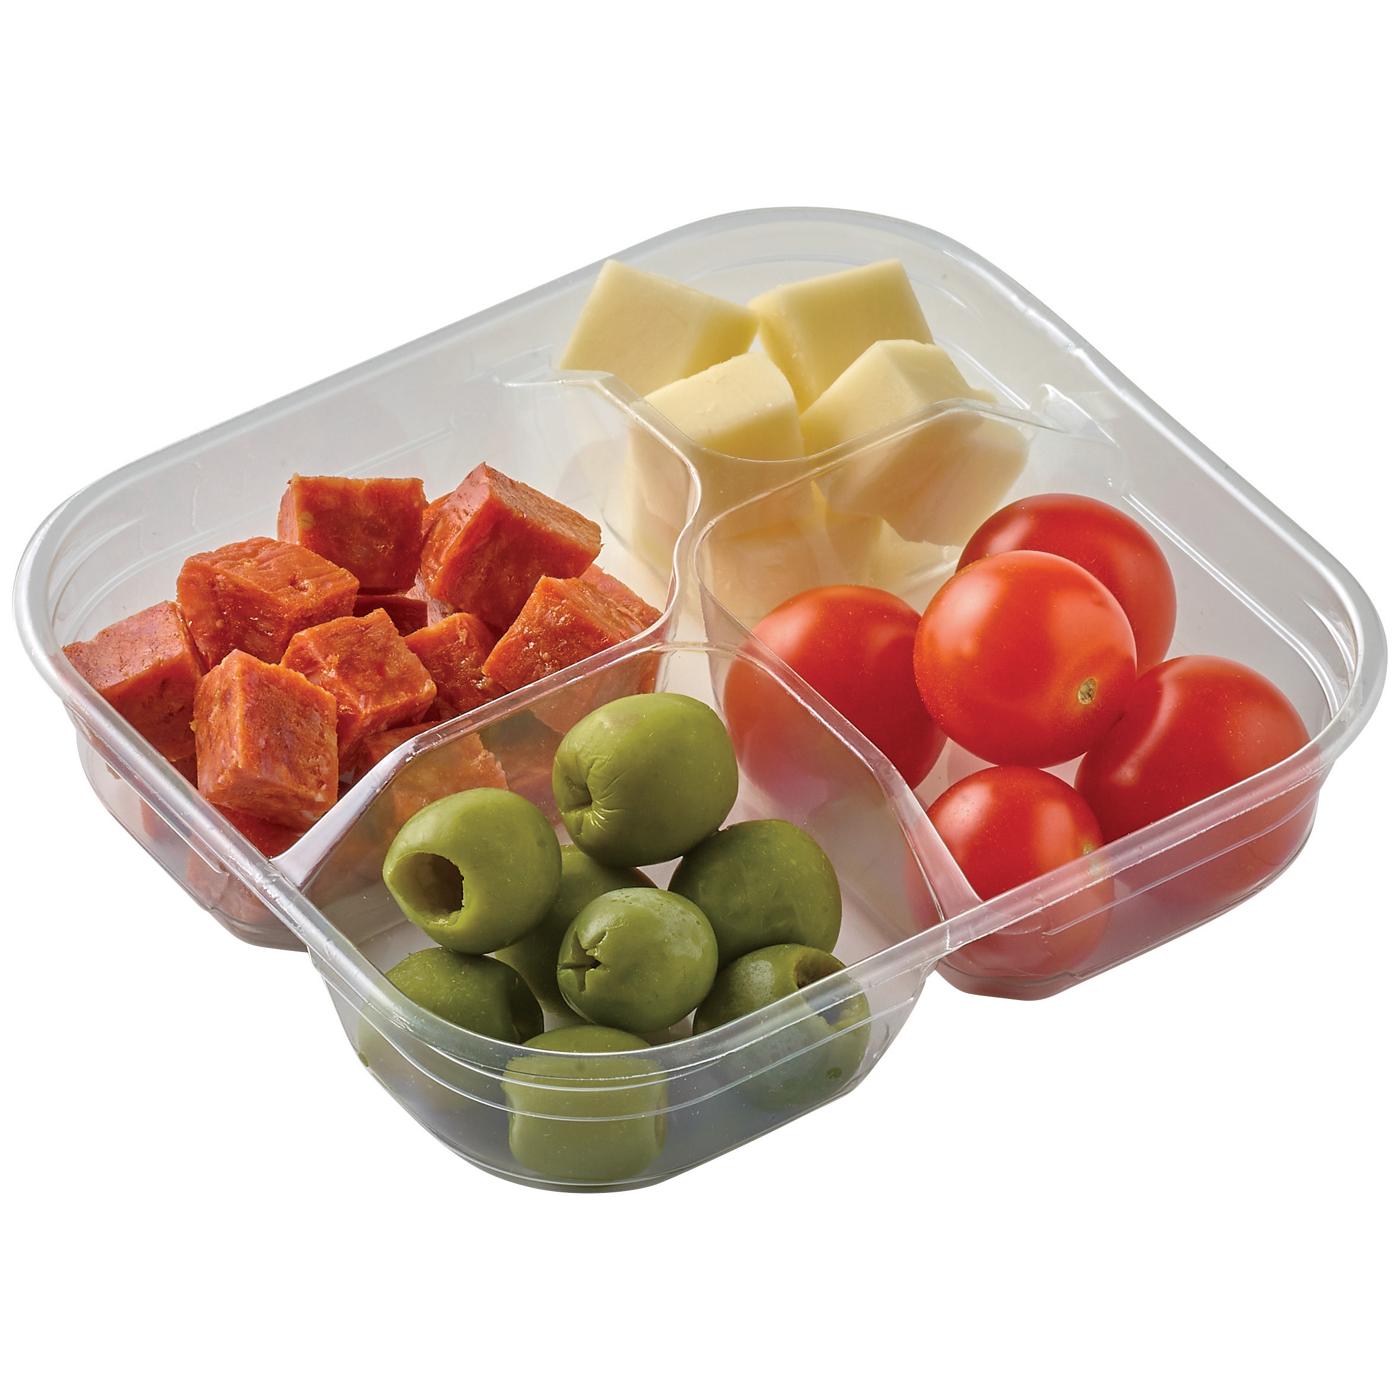 Meal Simple by H-E-B Snack Tray - Italian Style with Pepperoni, Cheese, Tomatoes & Olives; image 1 of 4